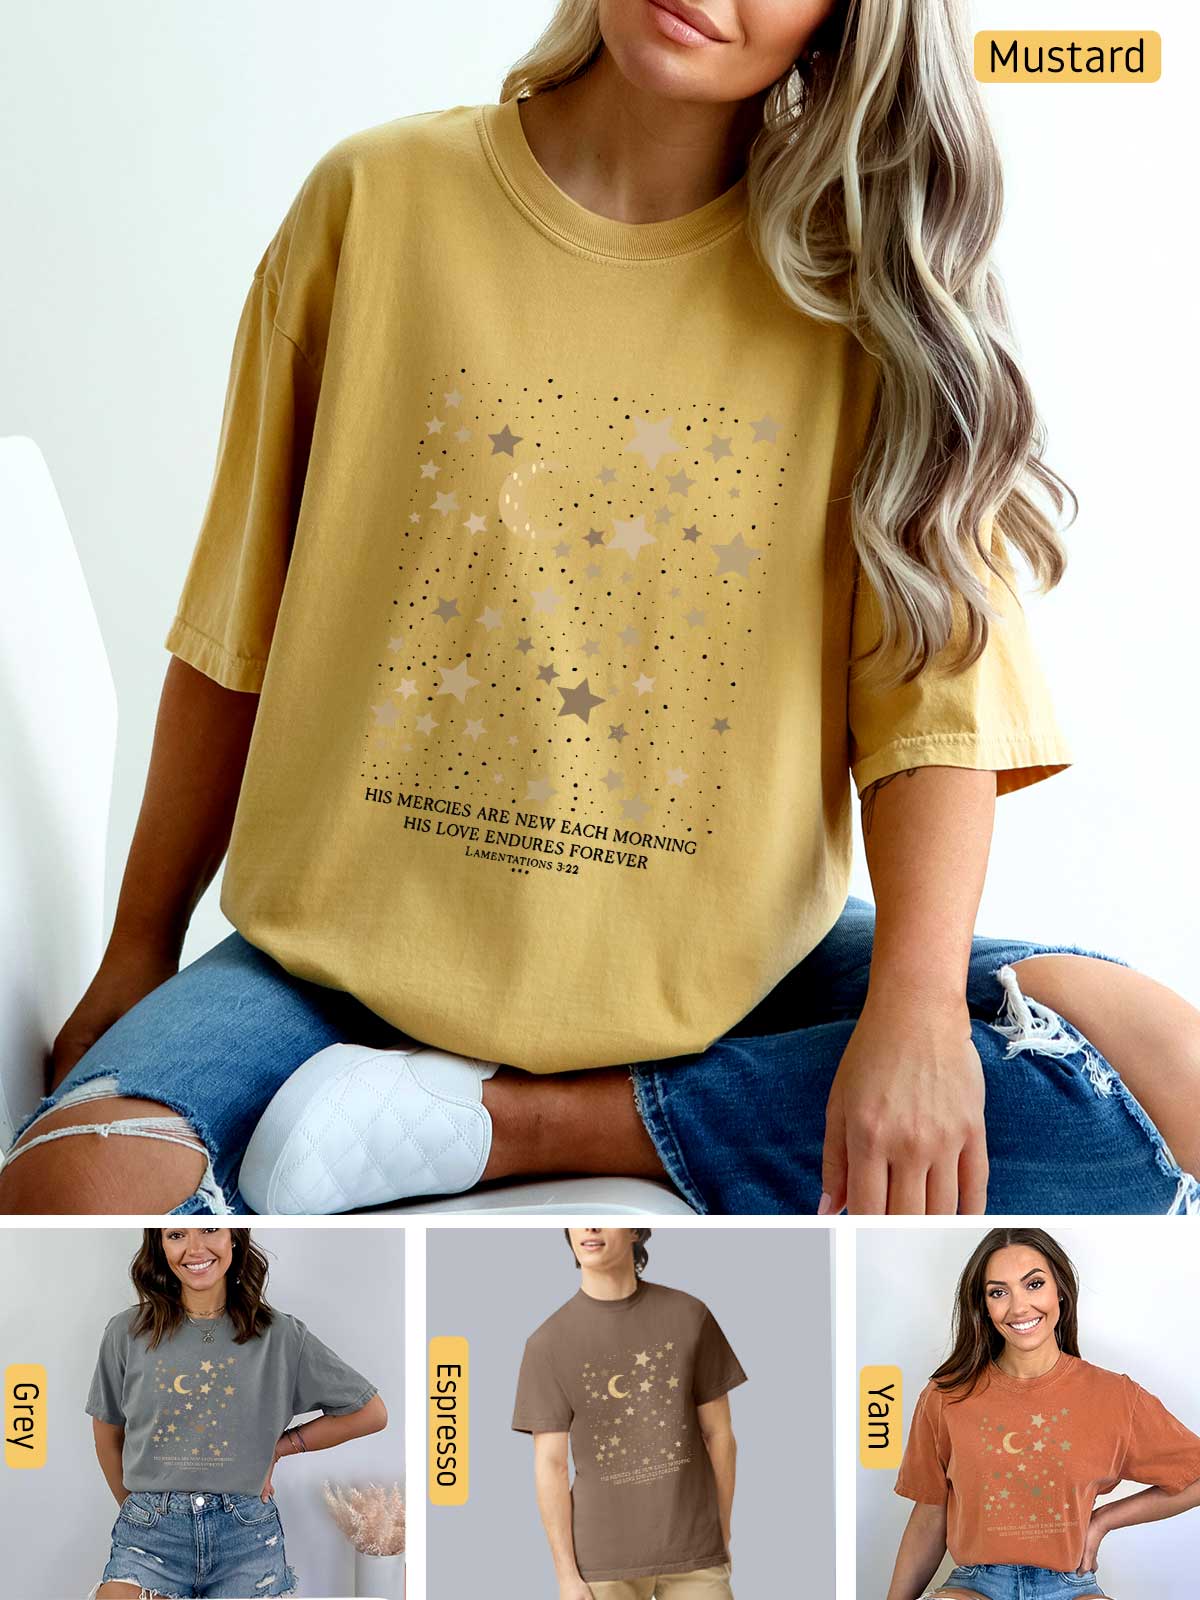 a woman wearing a mustard colored shirt with stars on it